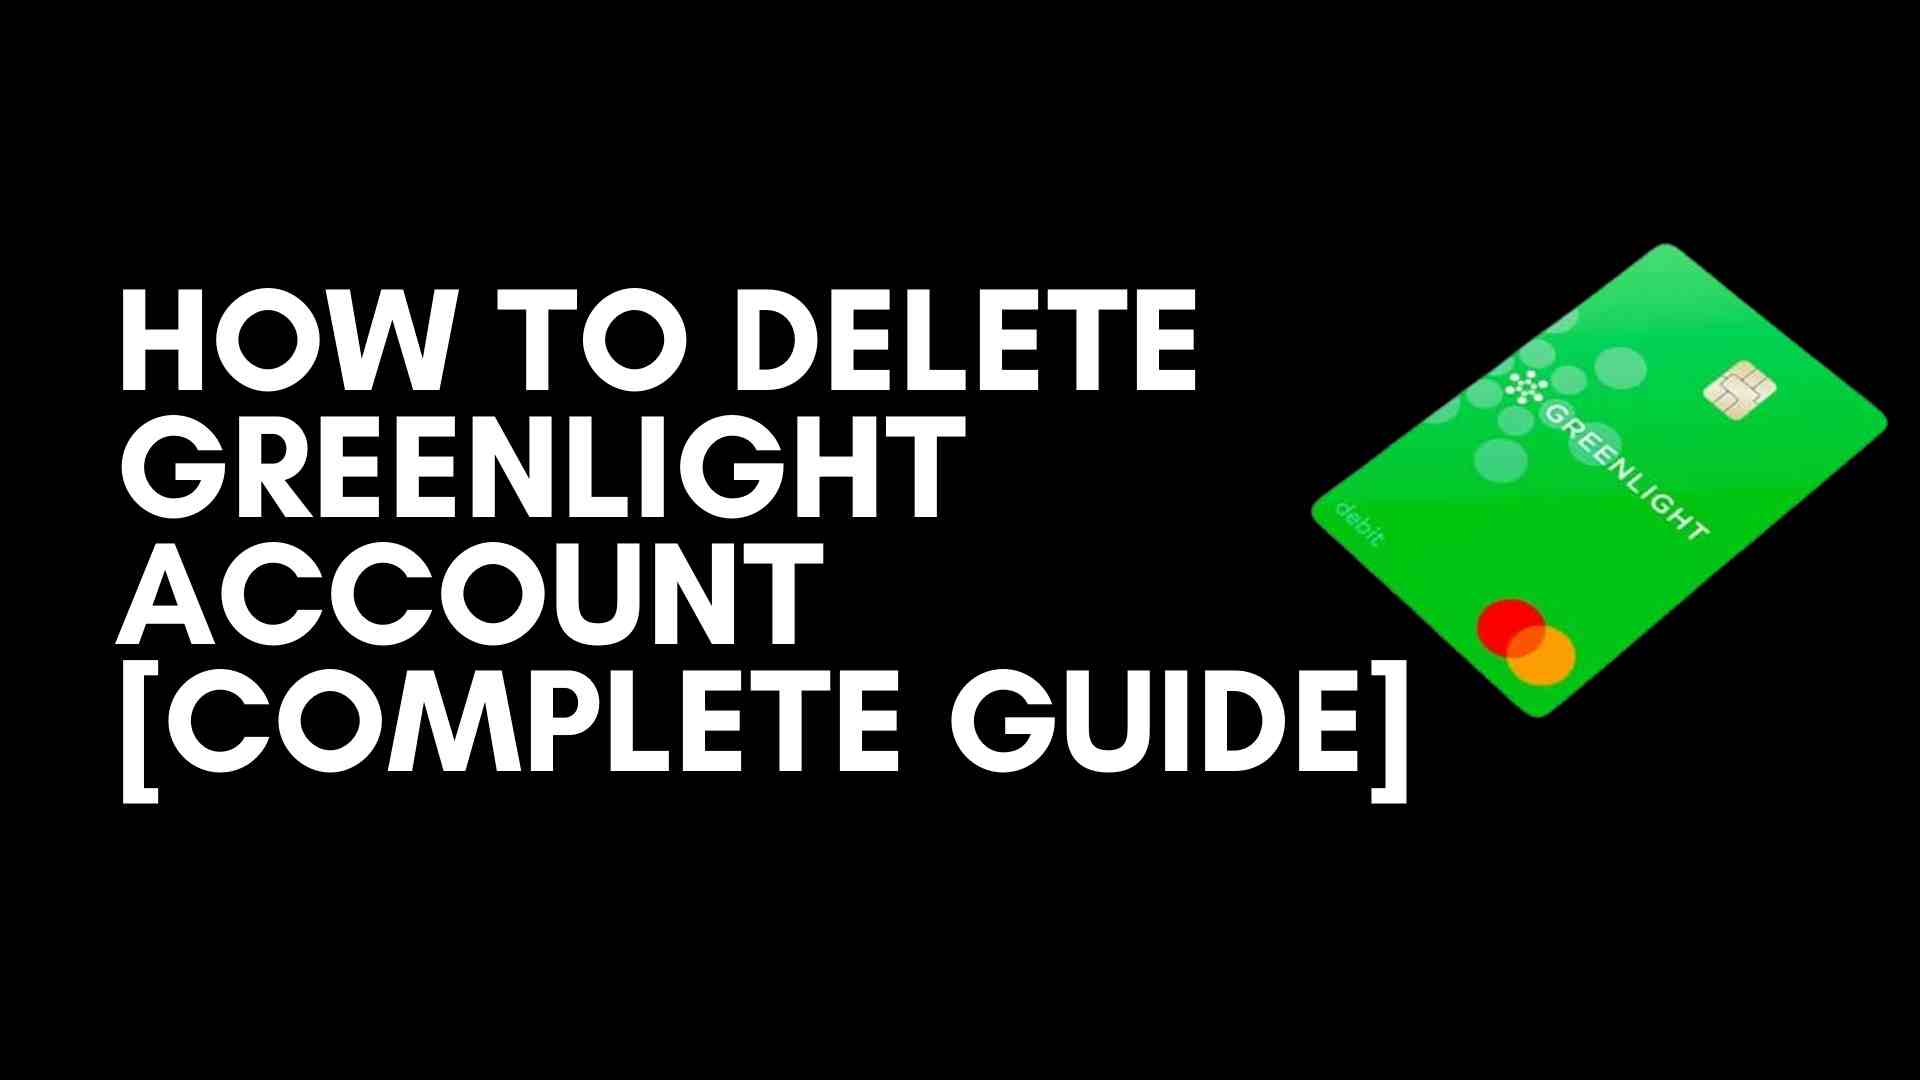 How to Delete Greenlight Account